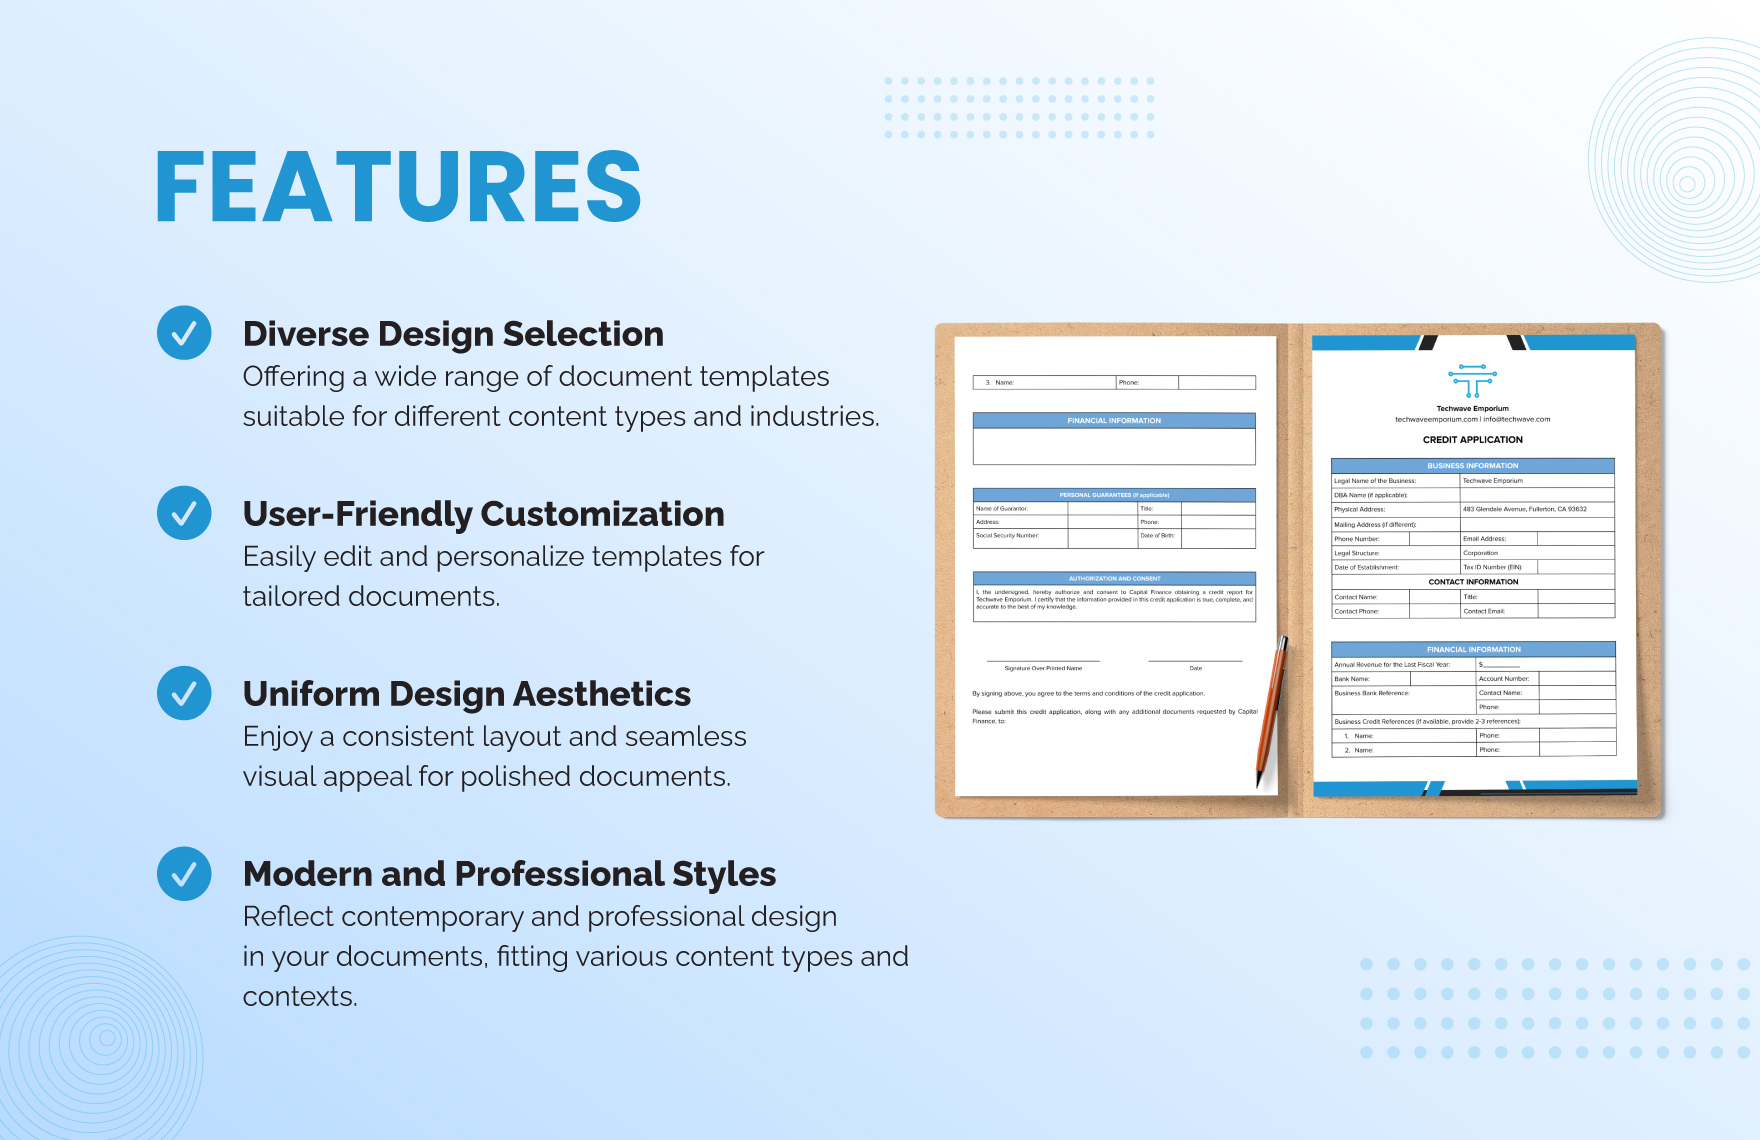 Credit Application for Business Template